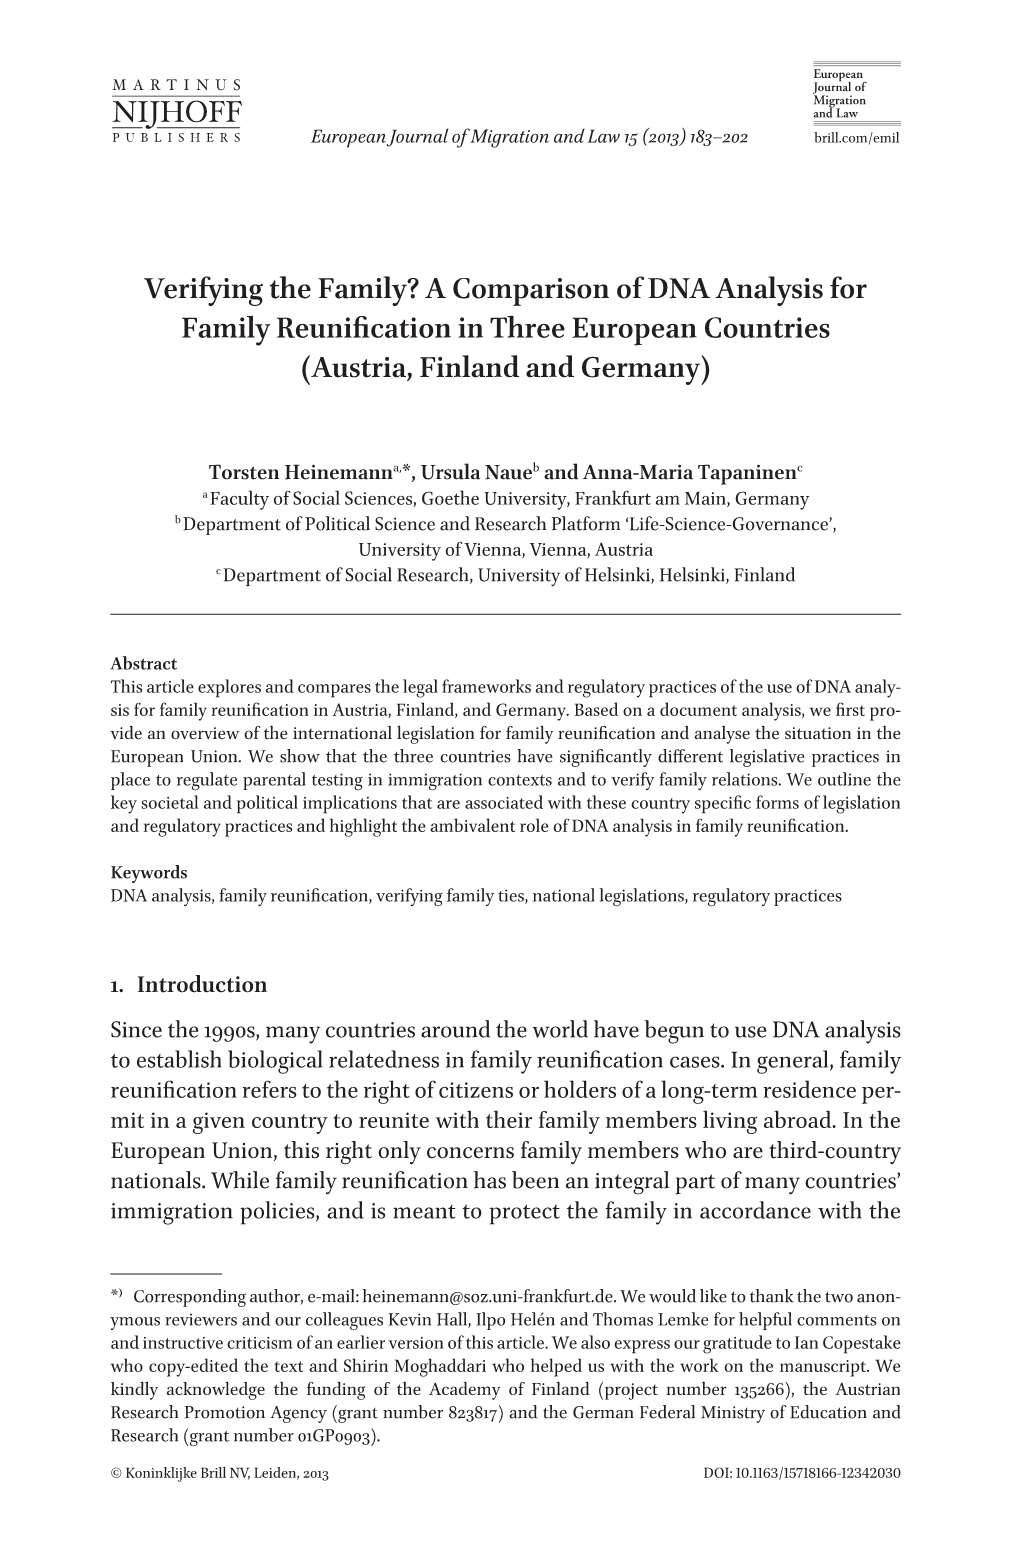 A Comparison of DNA Analysis for Family Reunification in Three European Countries (Austria, Finland and Germany)